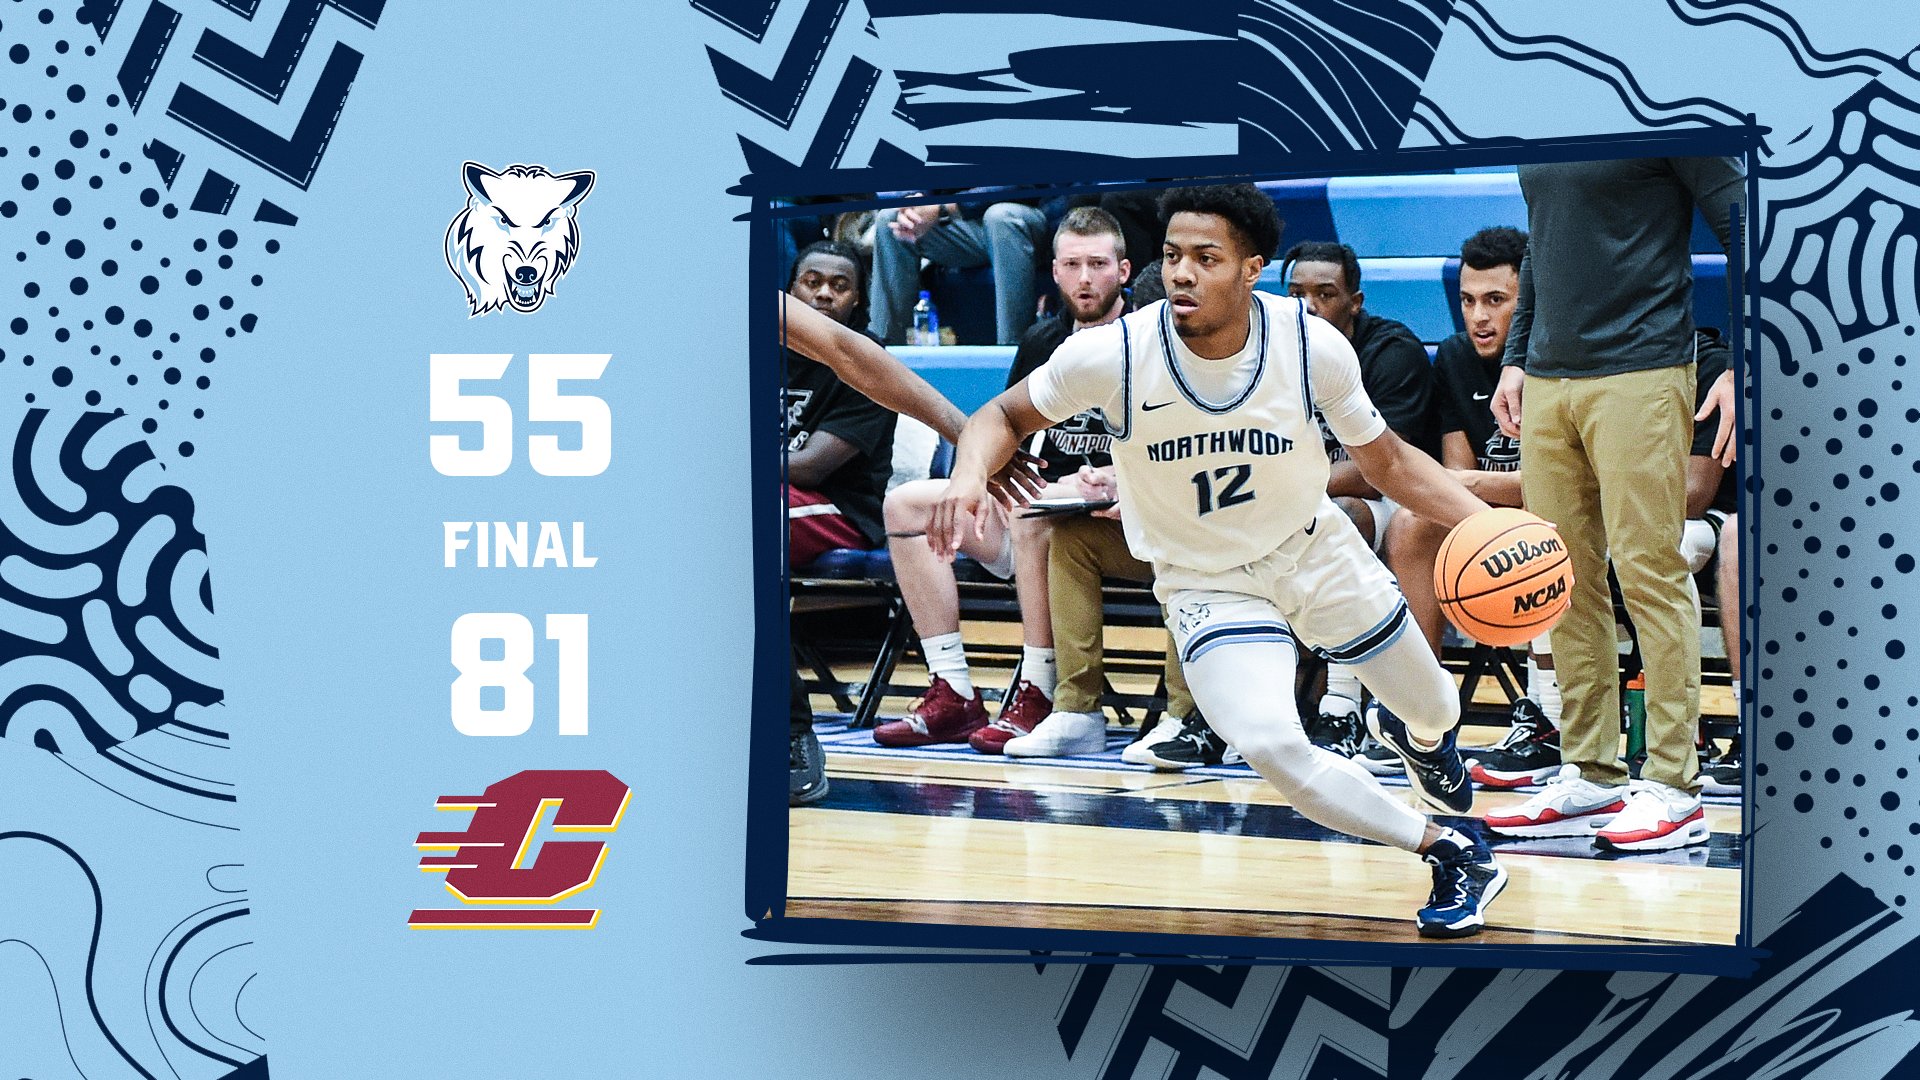 Men's Basketball Opens Play With Exhibition Loss At Central Michigan